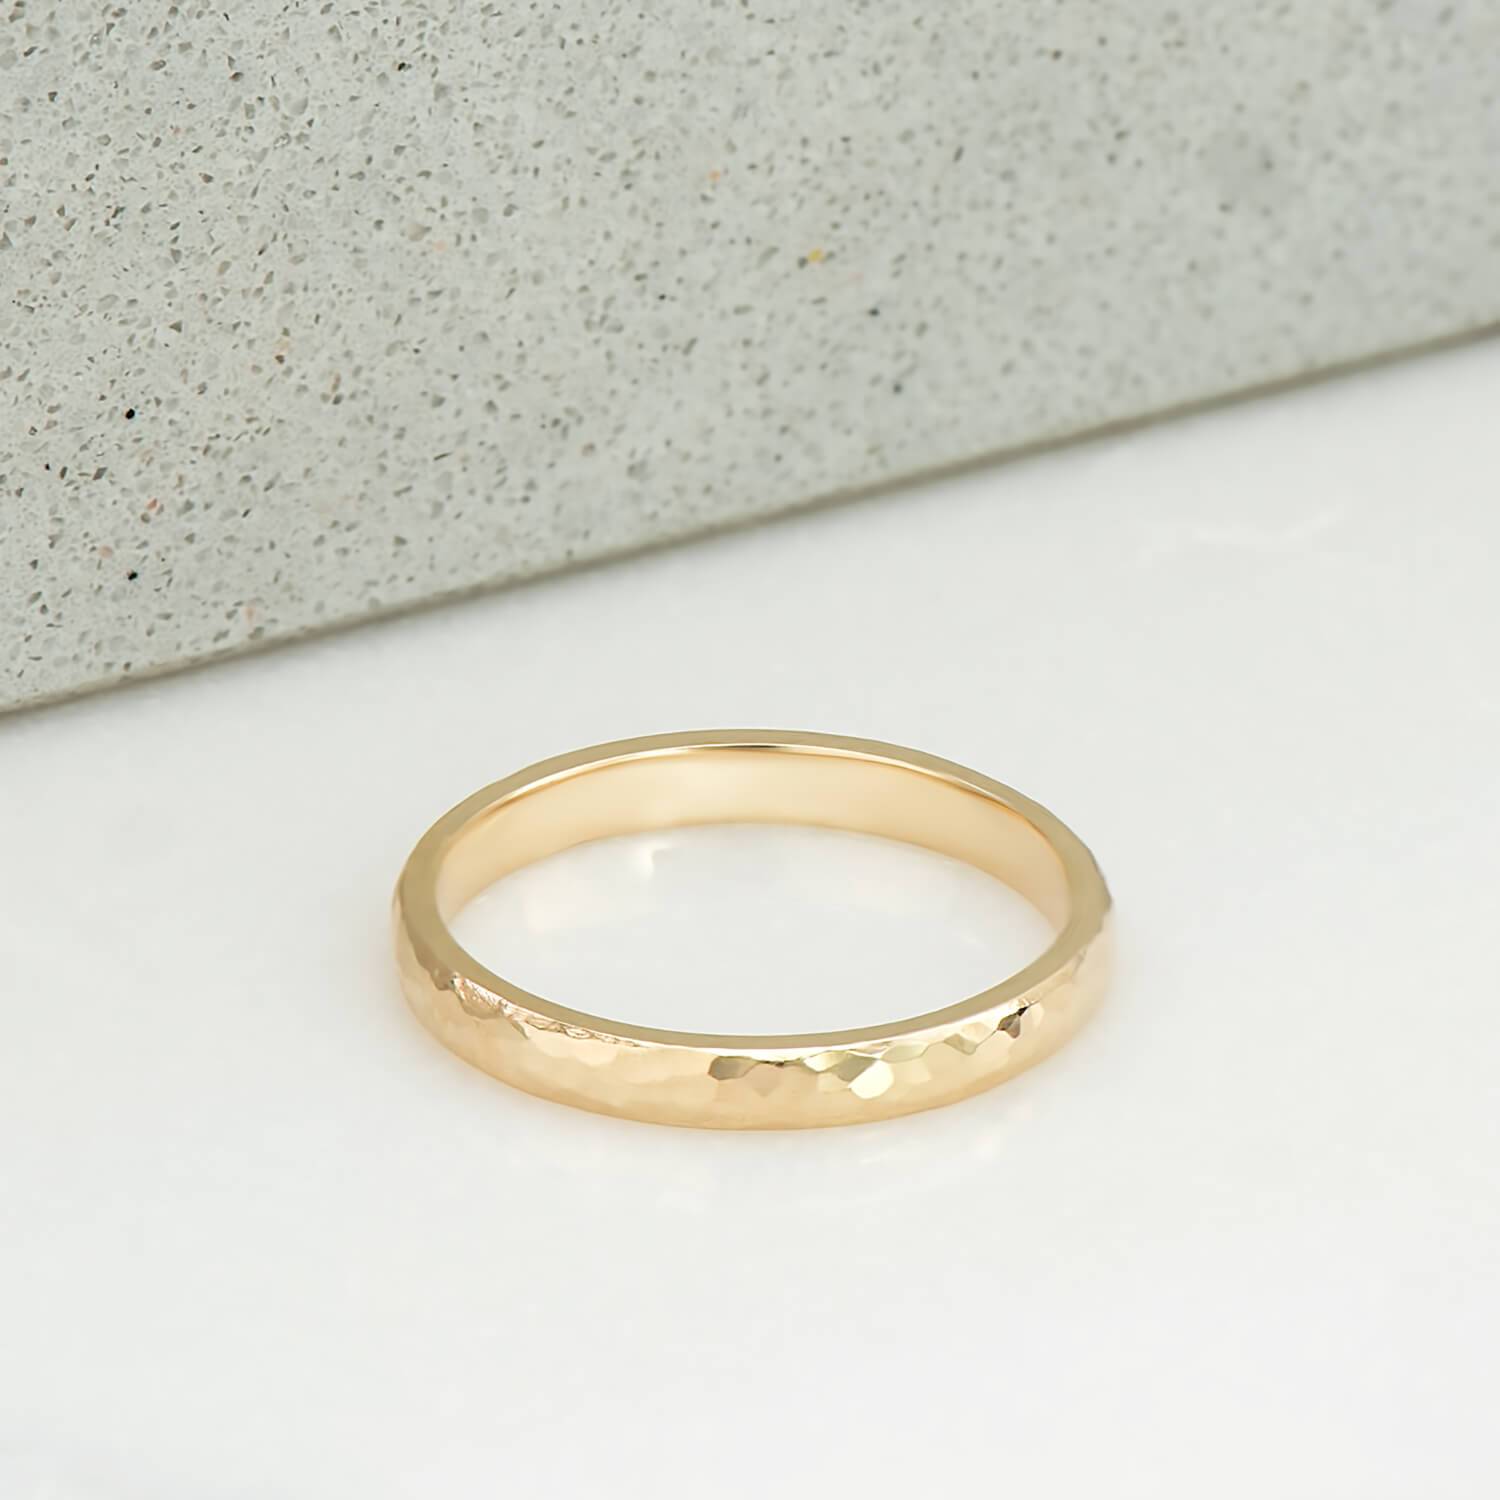 2 milimetre wide ring, polished and hammer finished, in 14 karat recycled yellow gold.